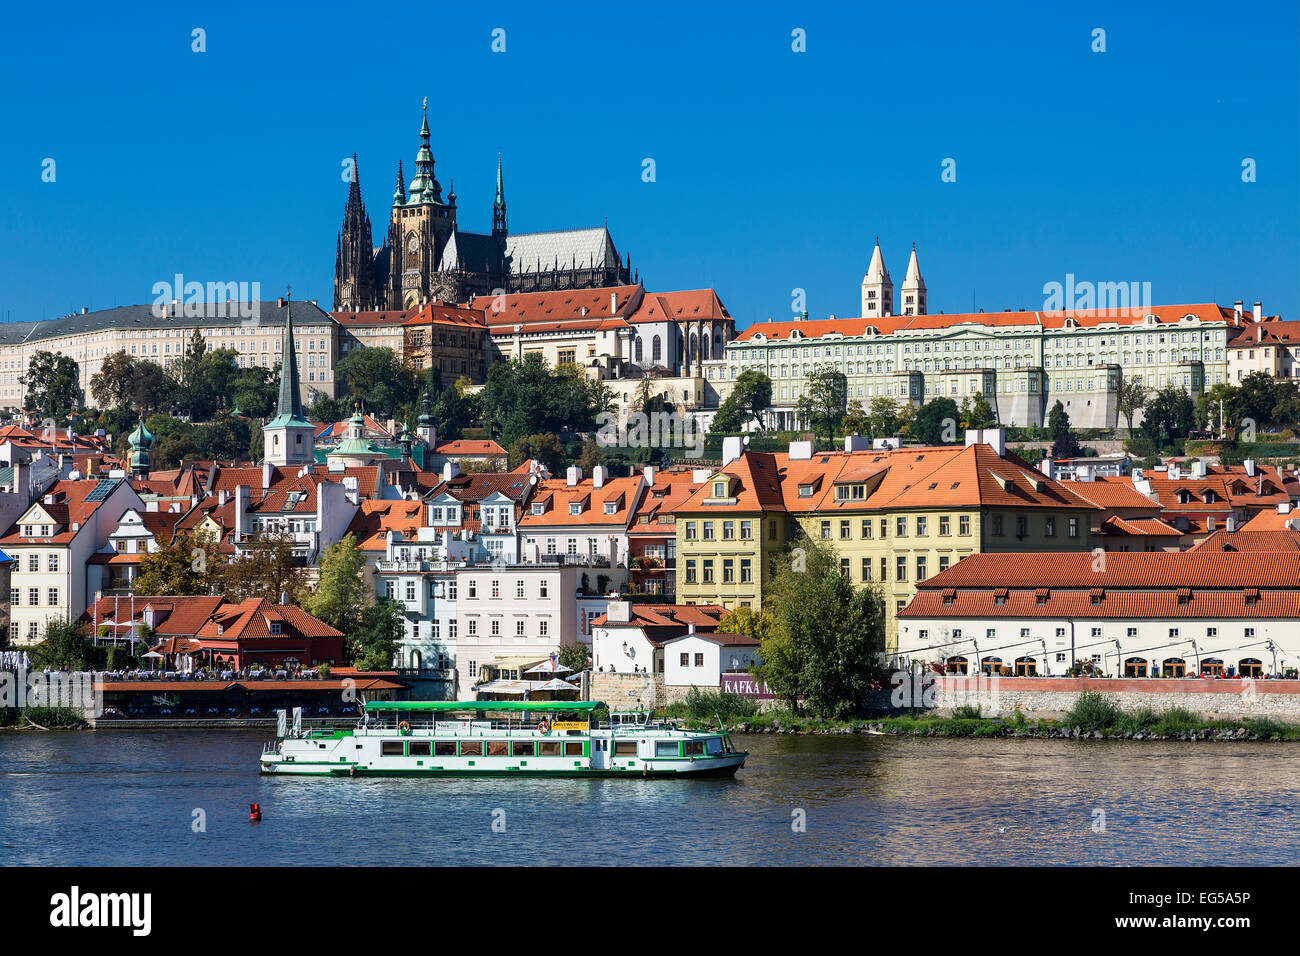 St Vitus's Cathedral and Castle of Prague Stock Photo